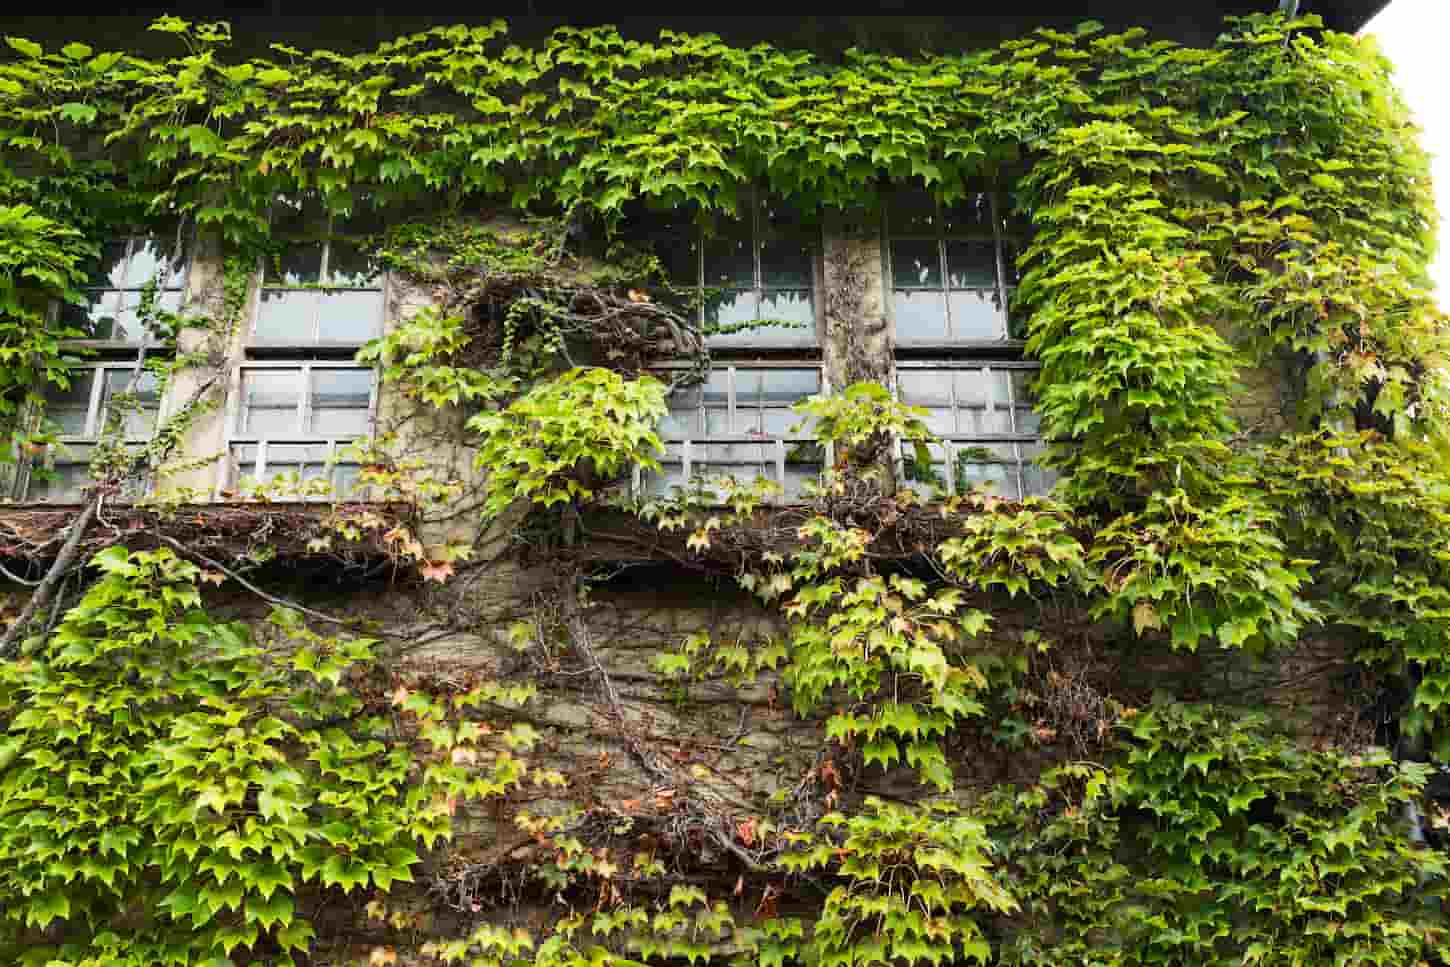 An image of an Ivy creeper on a wall surrounding the window.